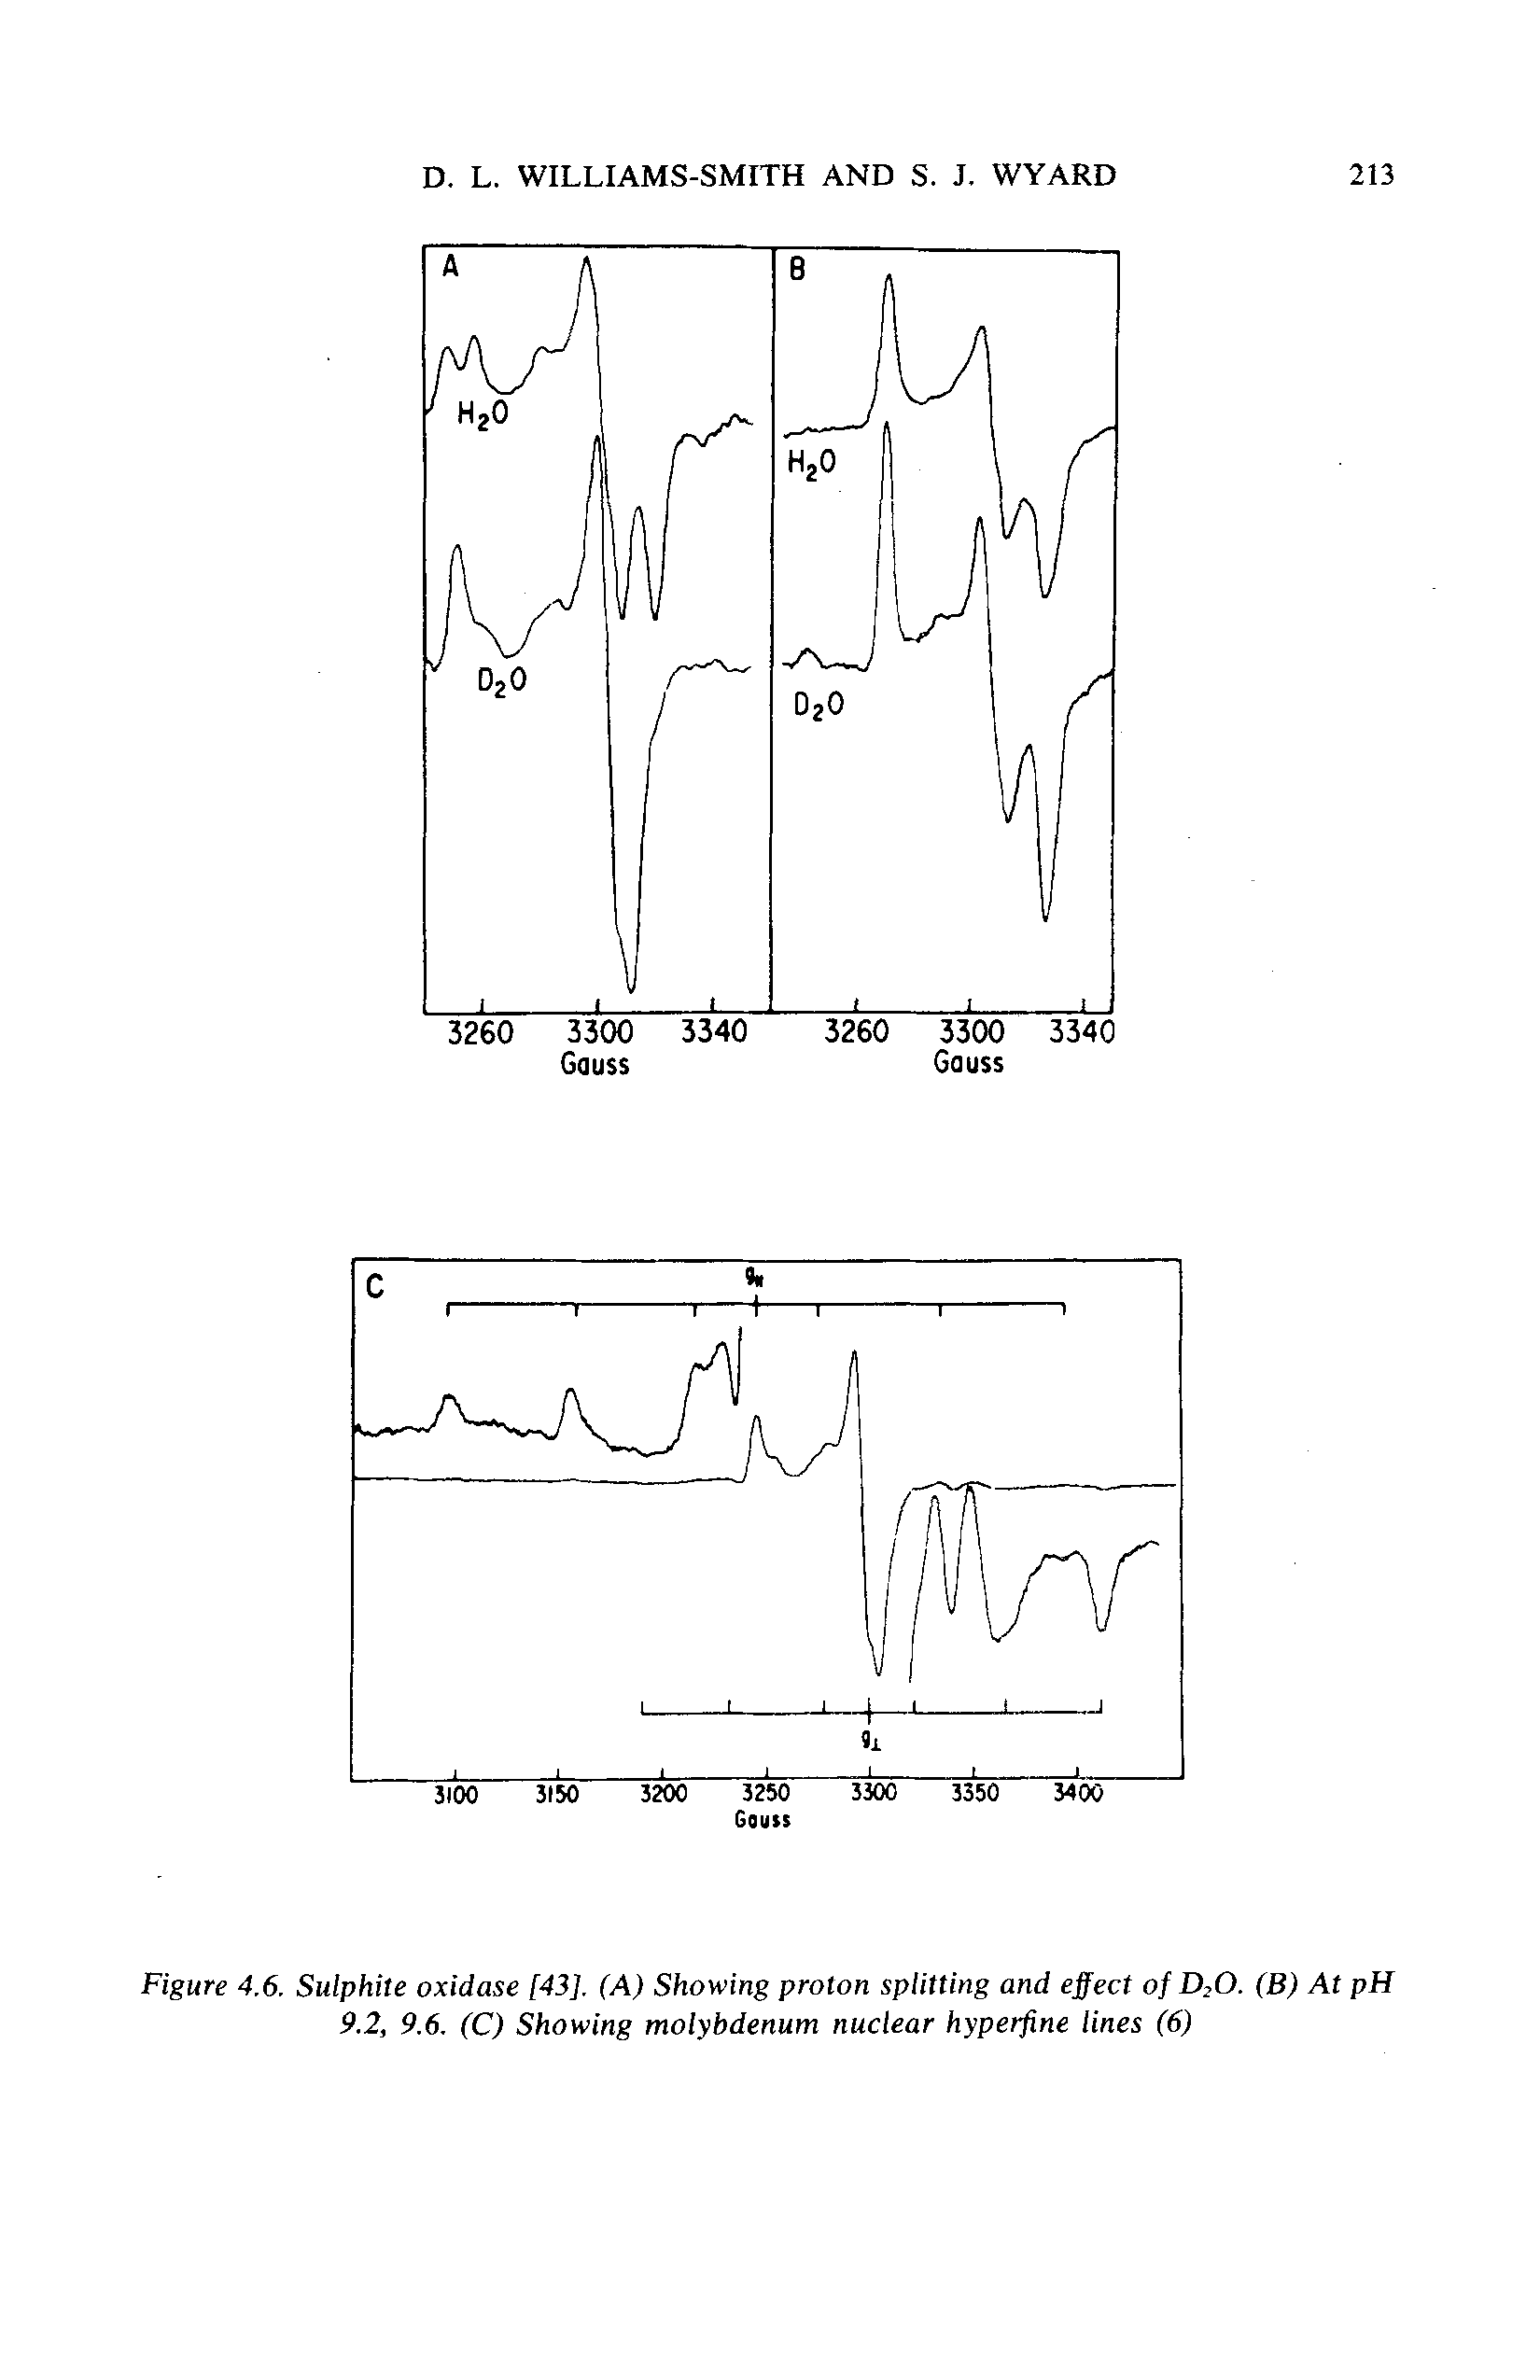 Figure 4.6. Sulphite oxidase [43]. (A) Showing proton splitting and effect of D2O. (B) At pH 9.2, 9.6. (C) Showing molybdenum nuclear hyperfine lines (6)...